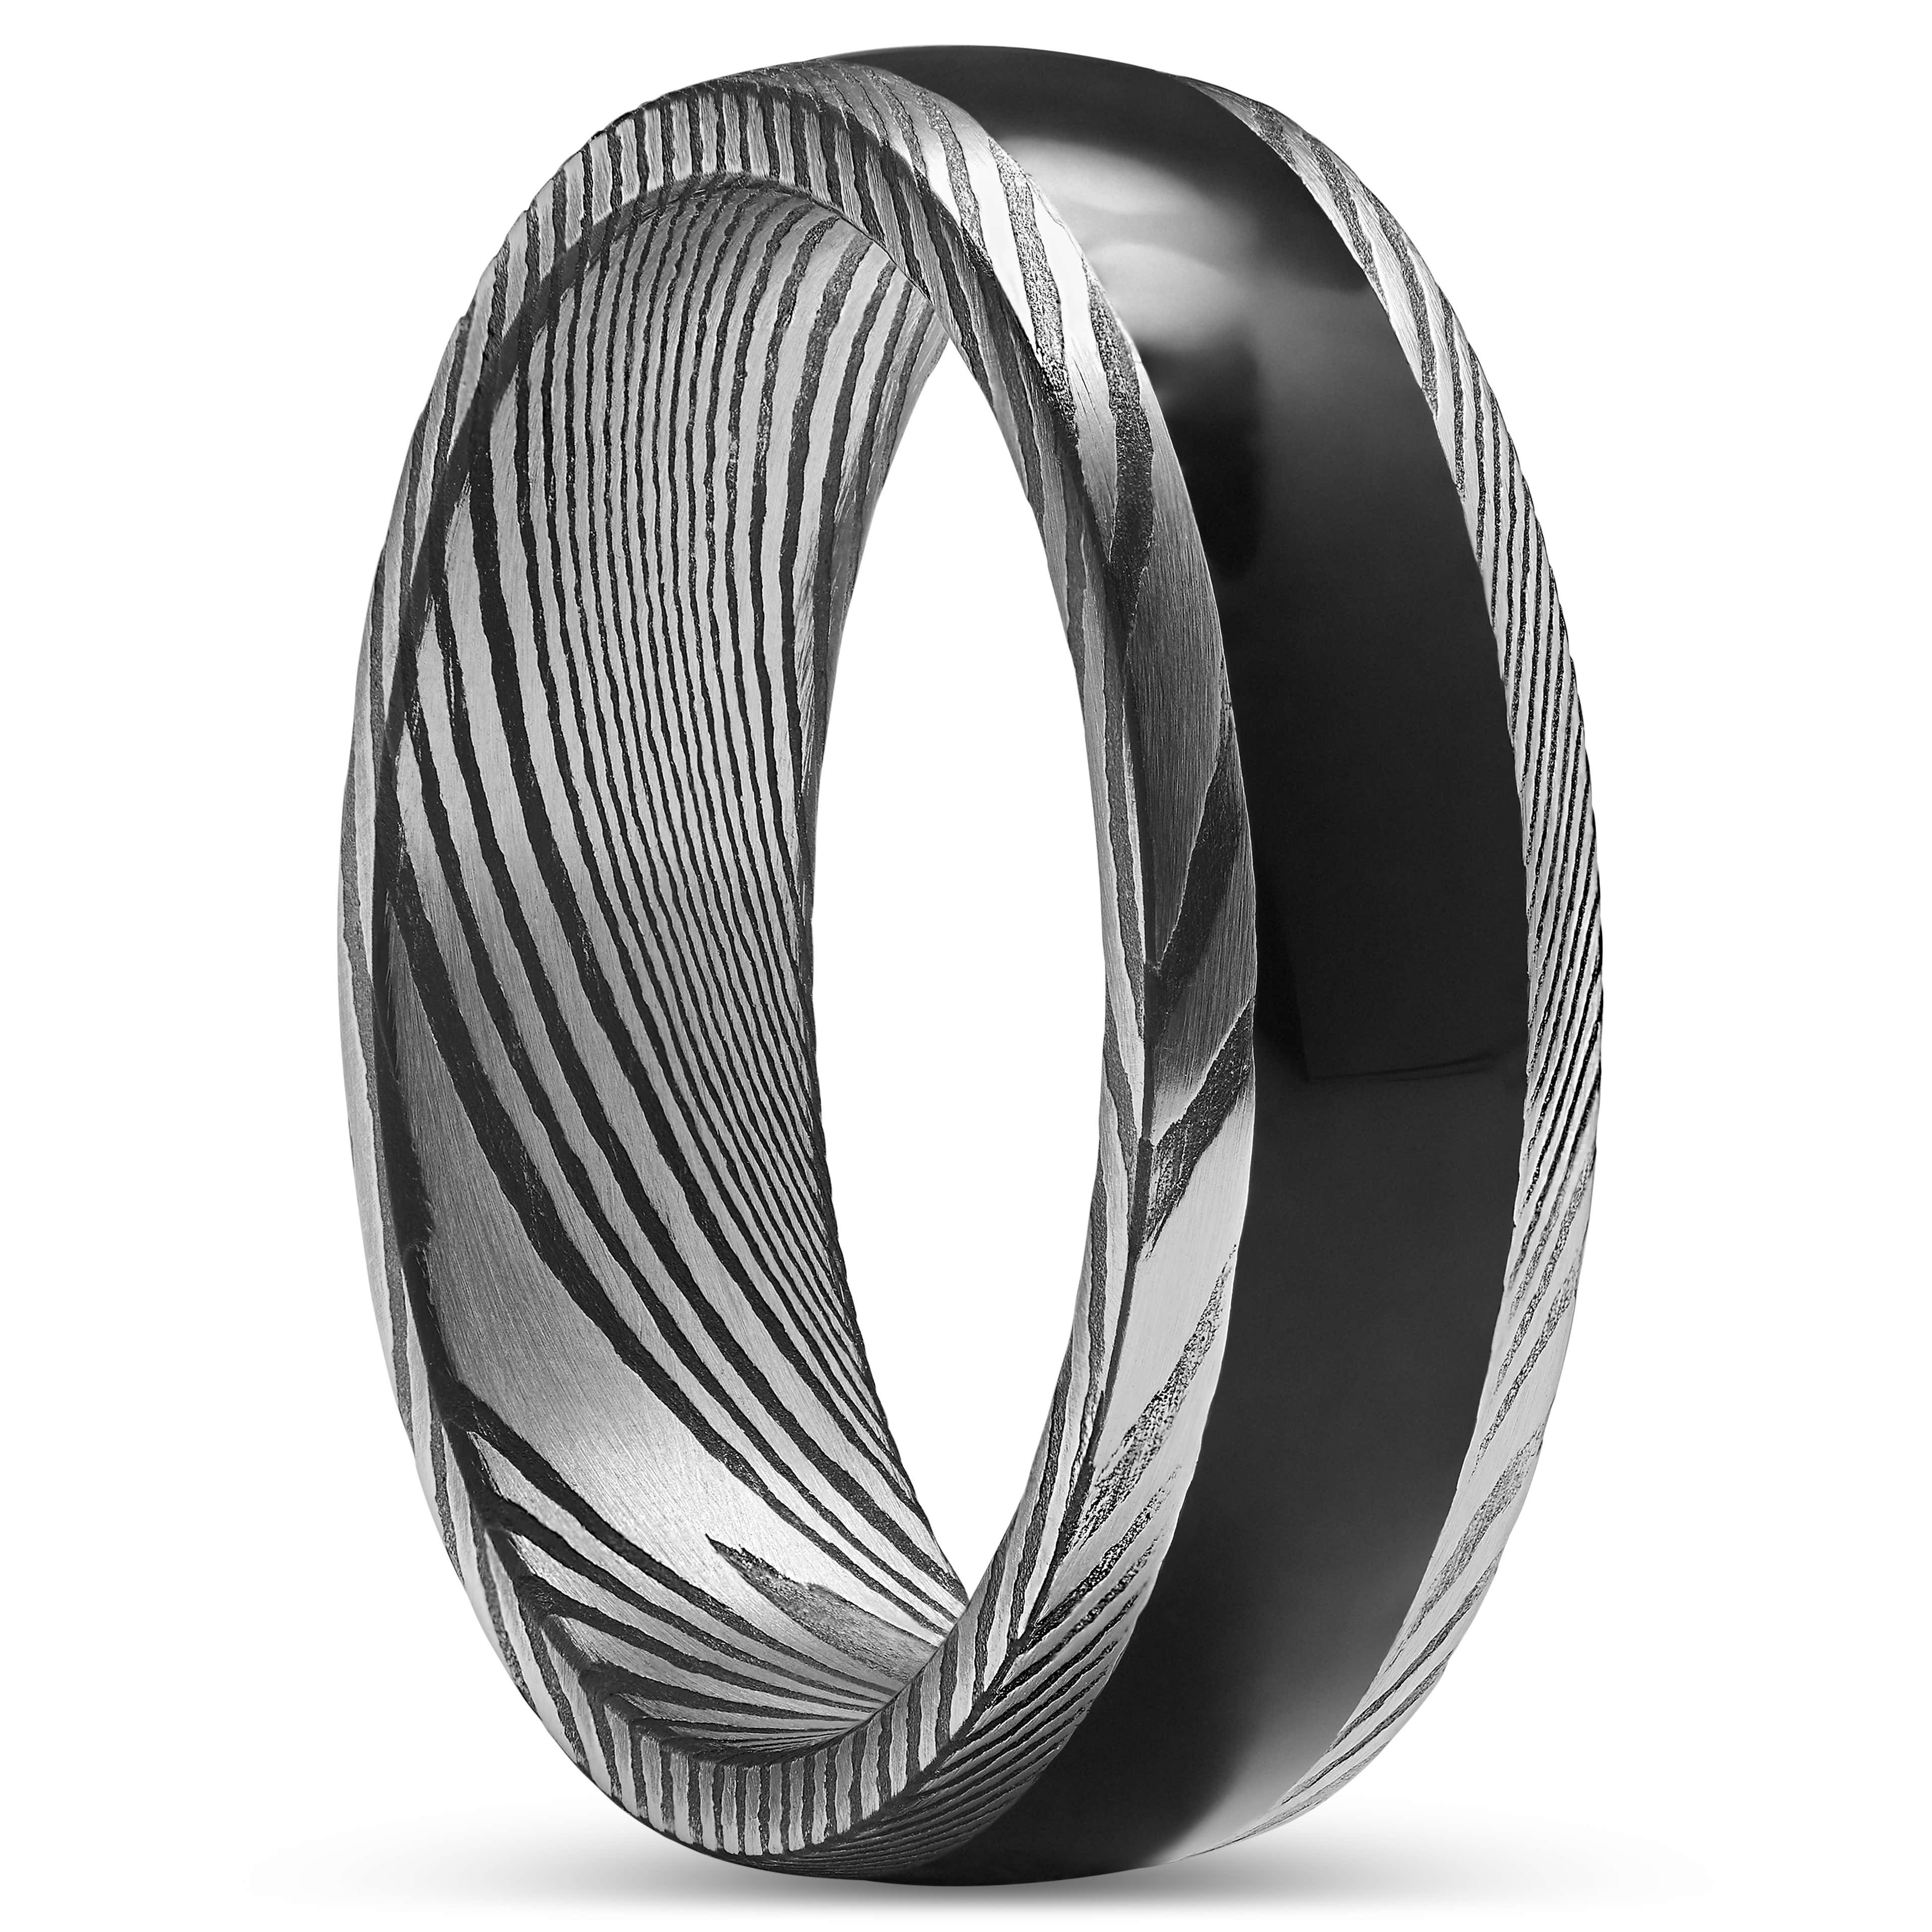 Fortis | 7 mm Gunmetal Gray and Silver-Tone Damascus Steel Ring with Onyx Inlay